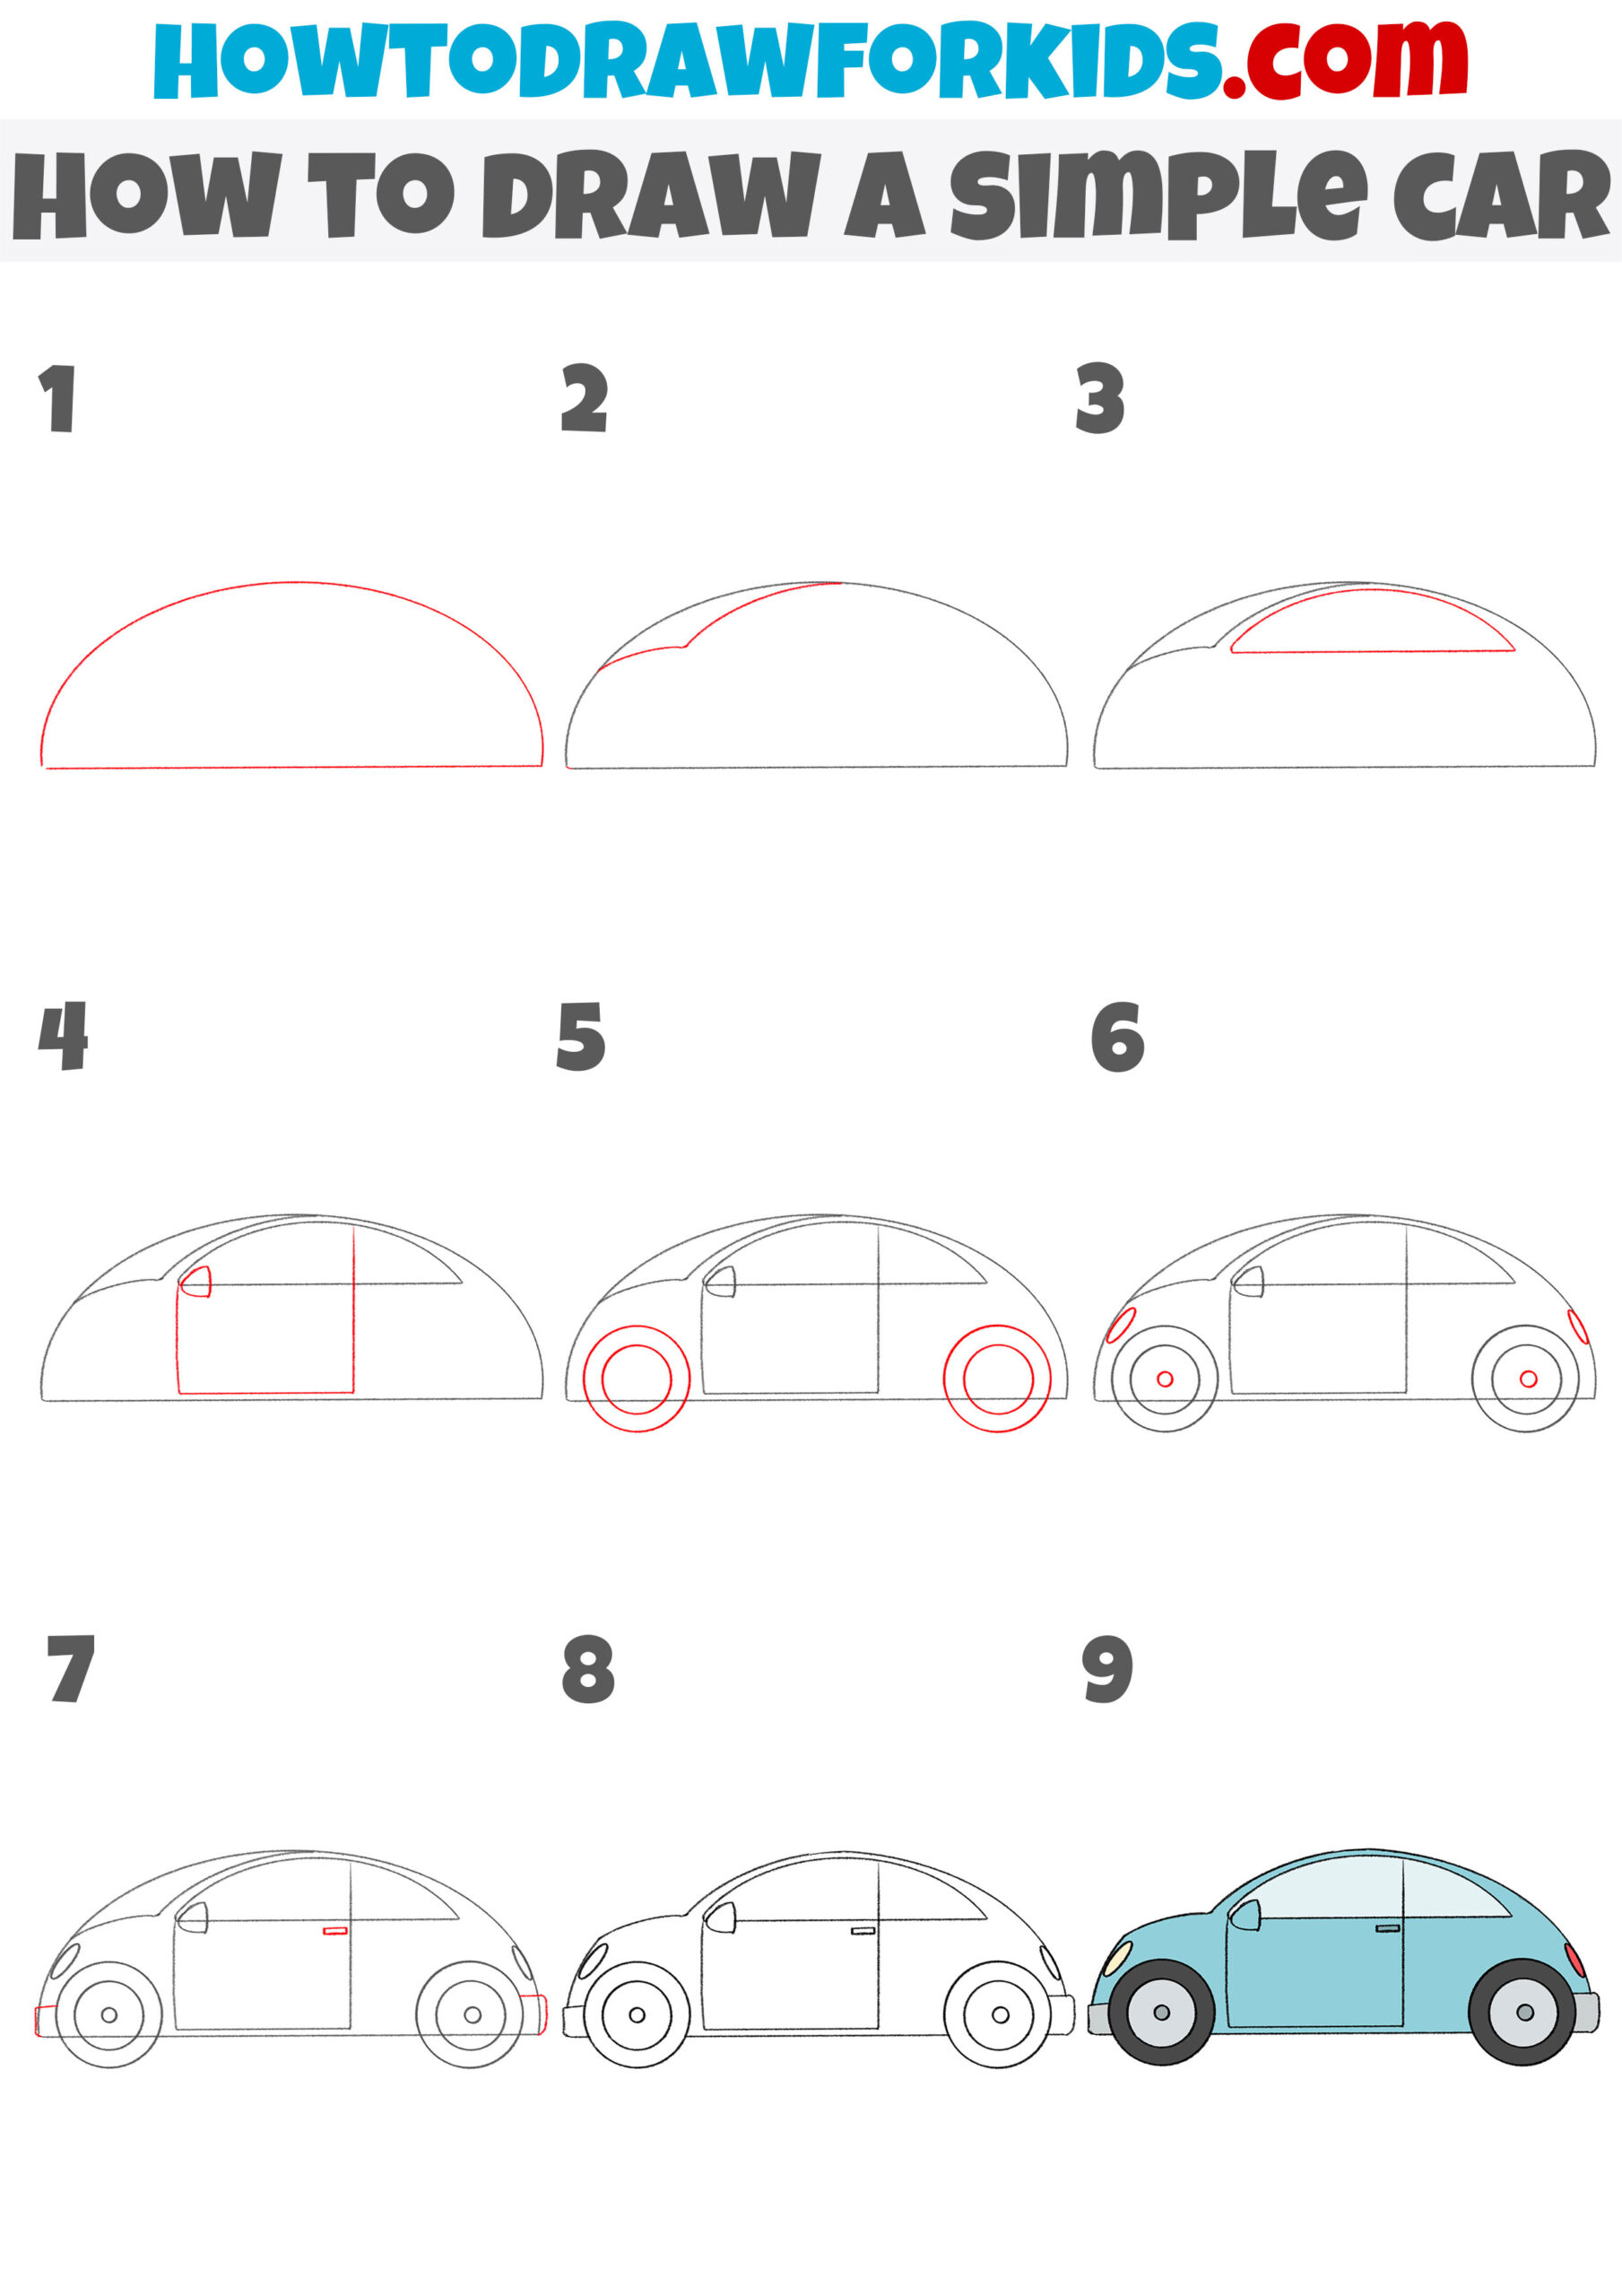 how to draw a simple car step by step